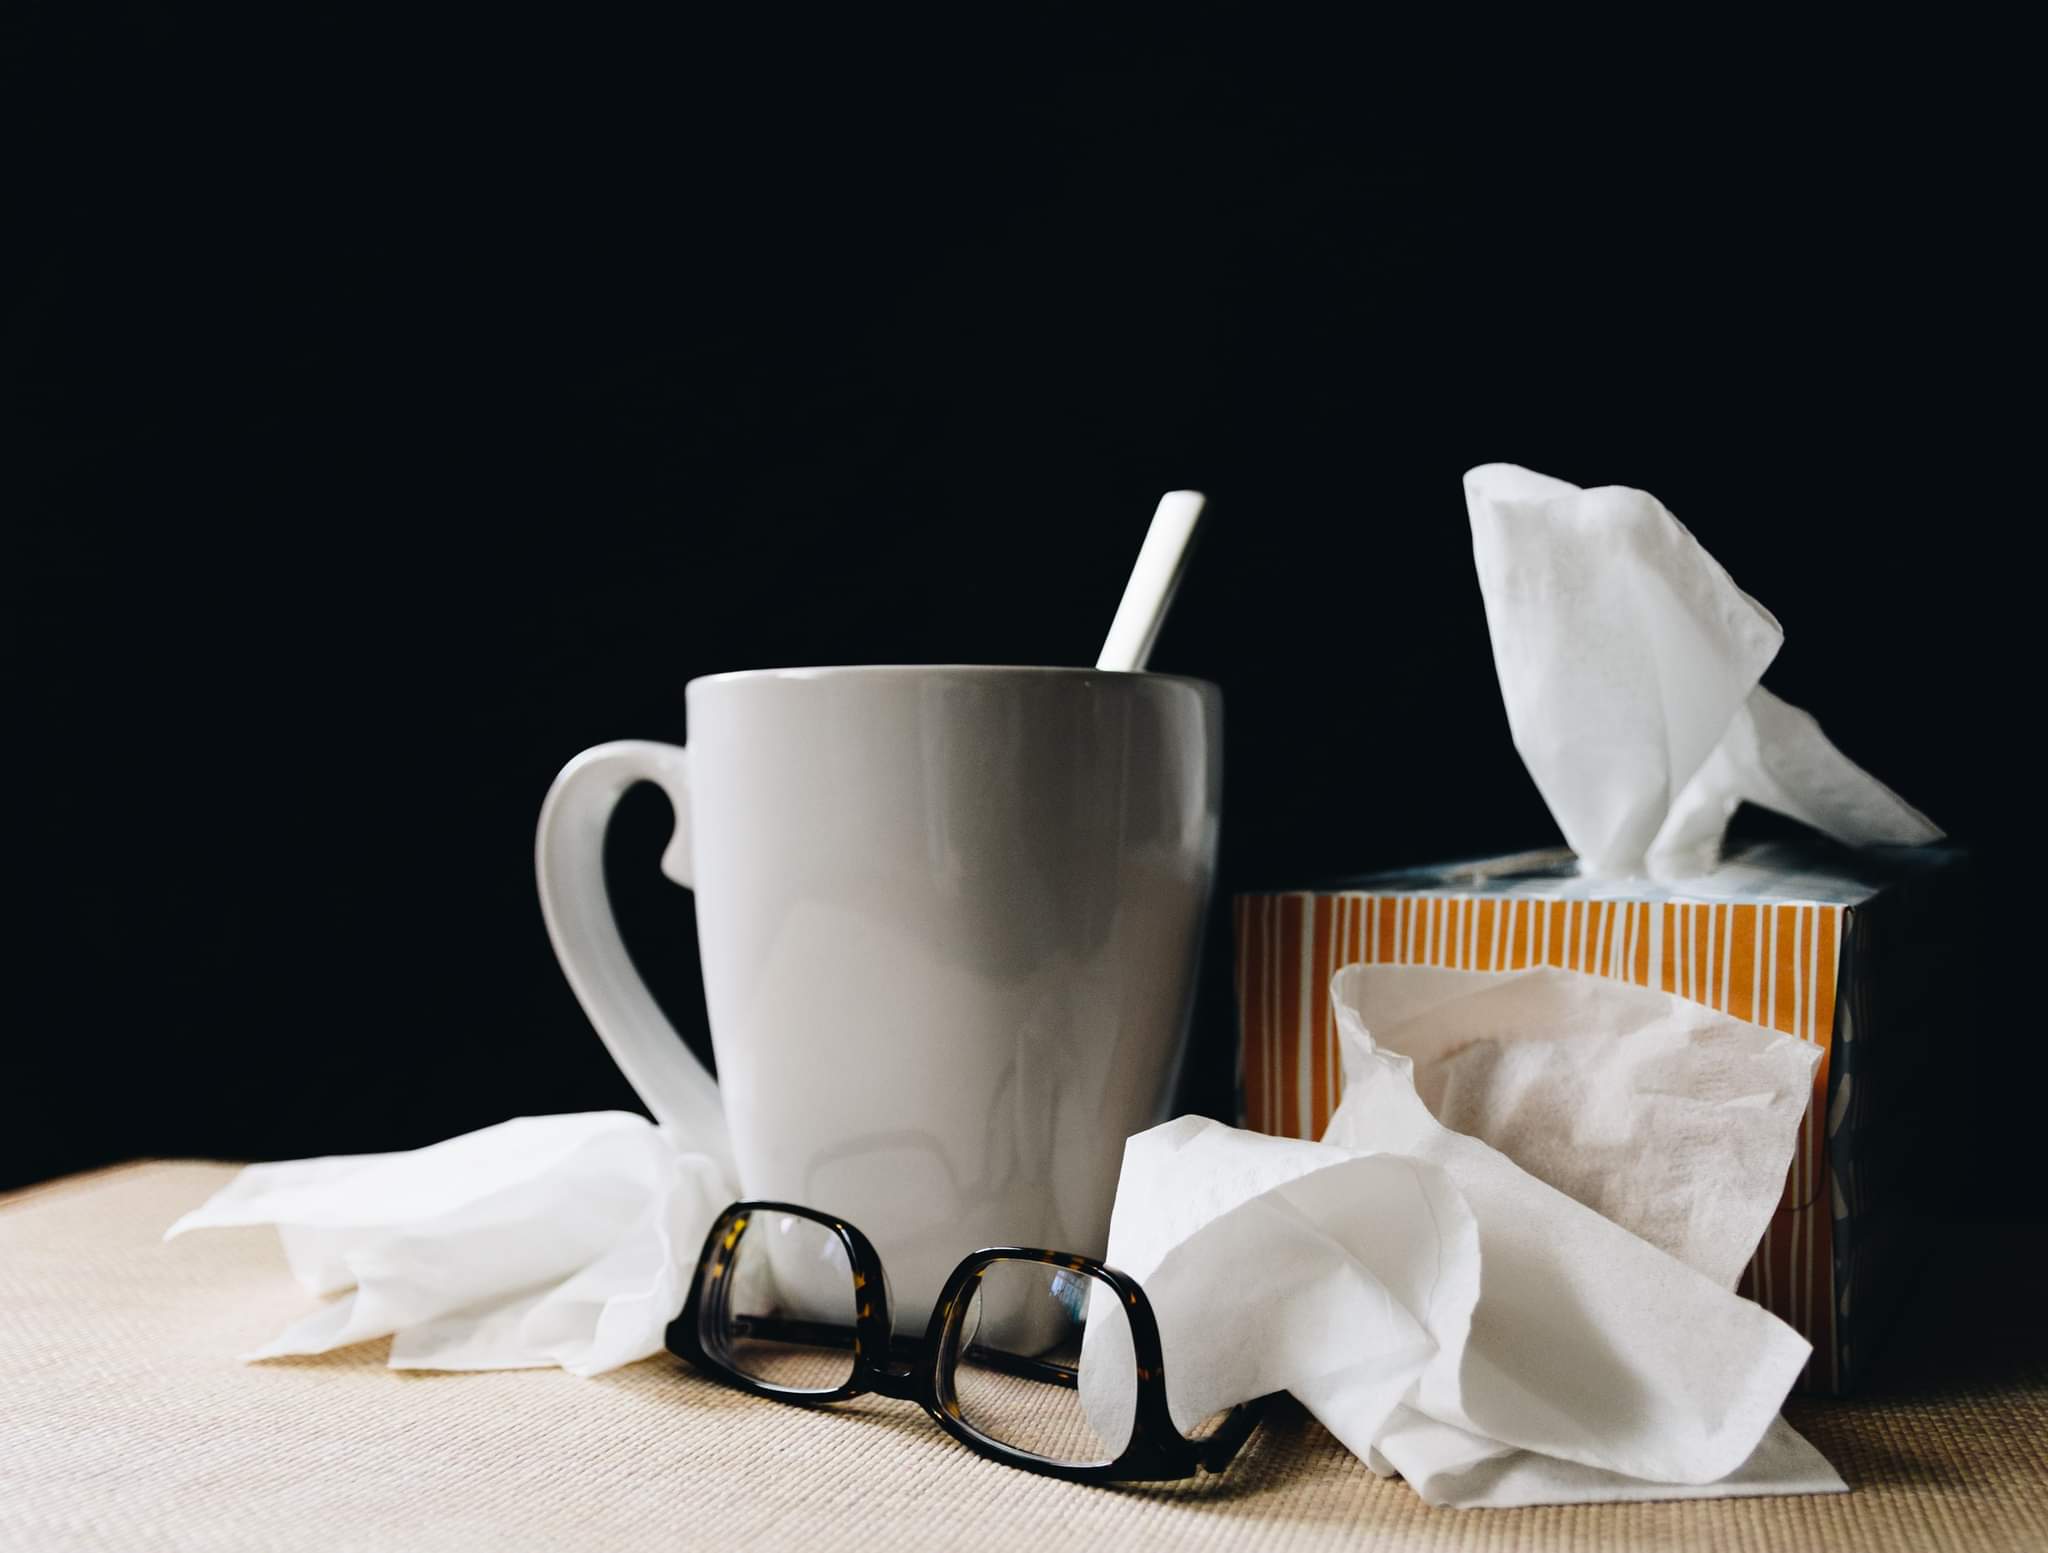 How has employee behaviour towards sick days changed since COVID?